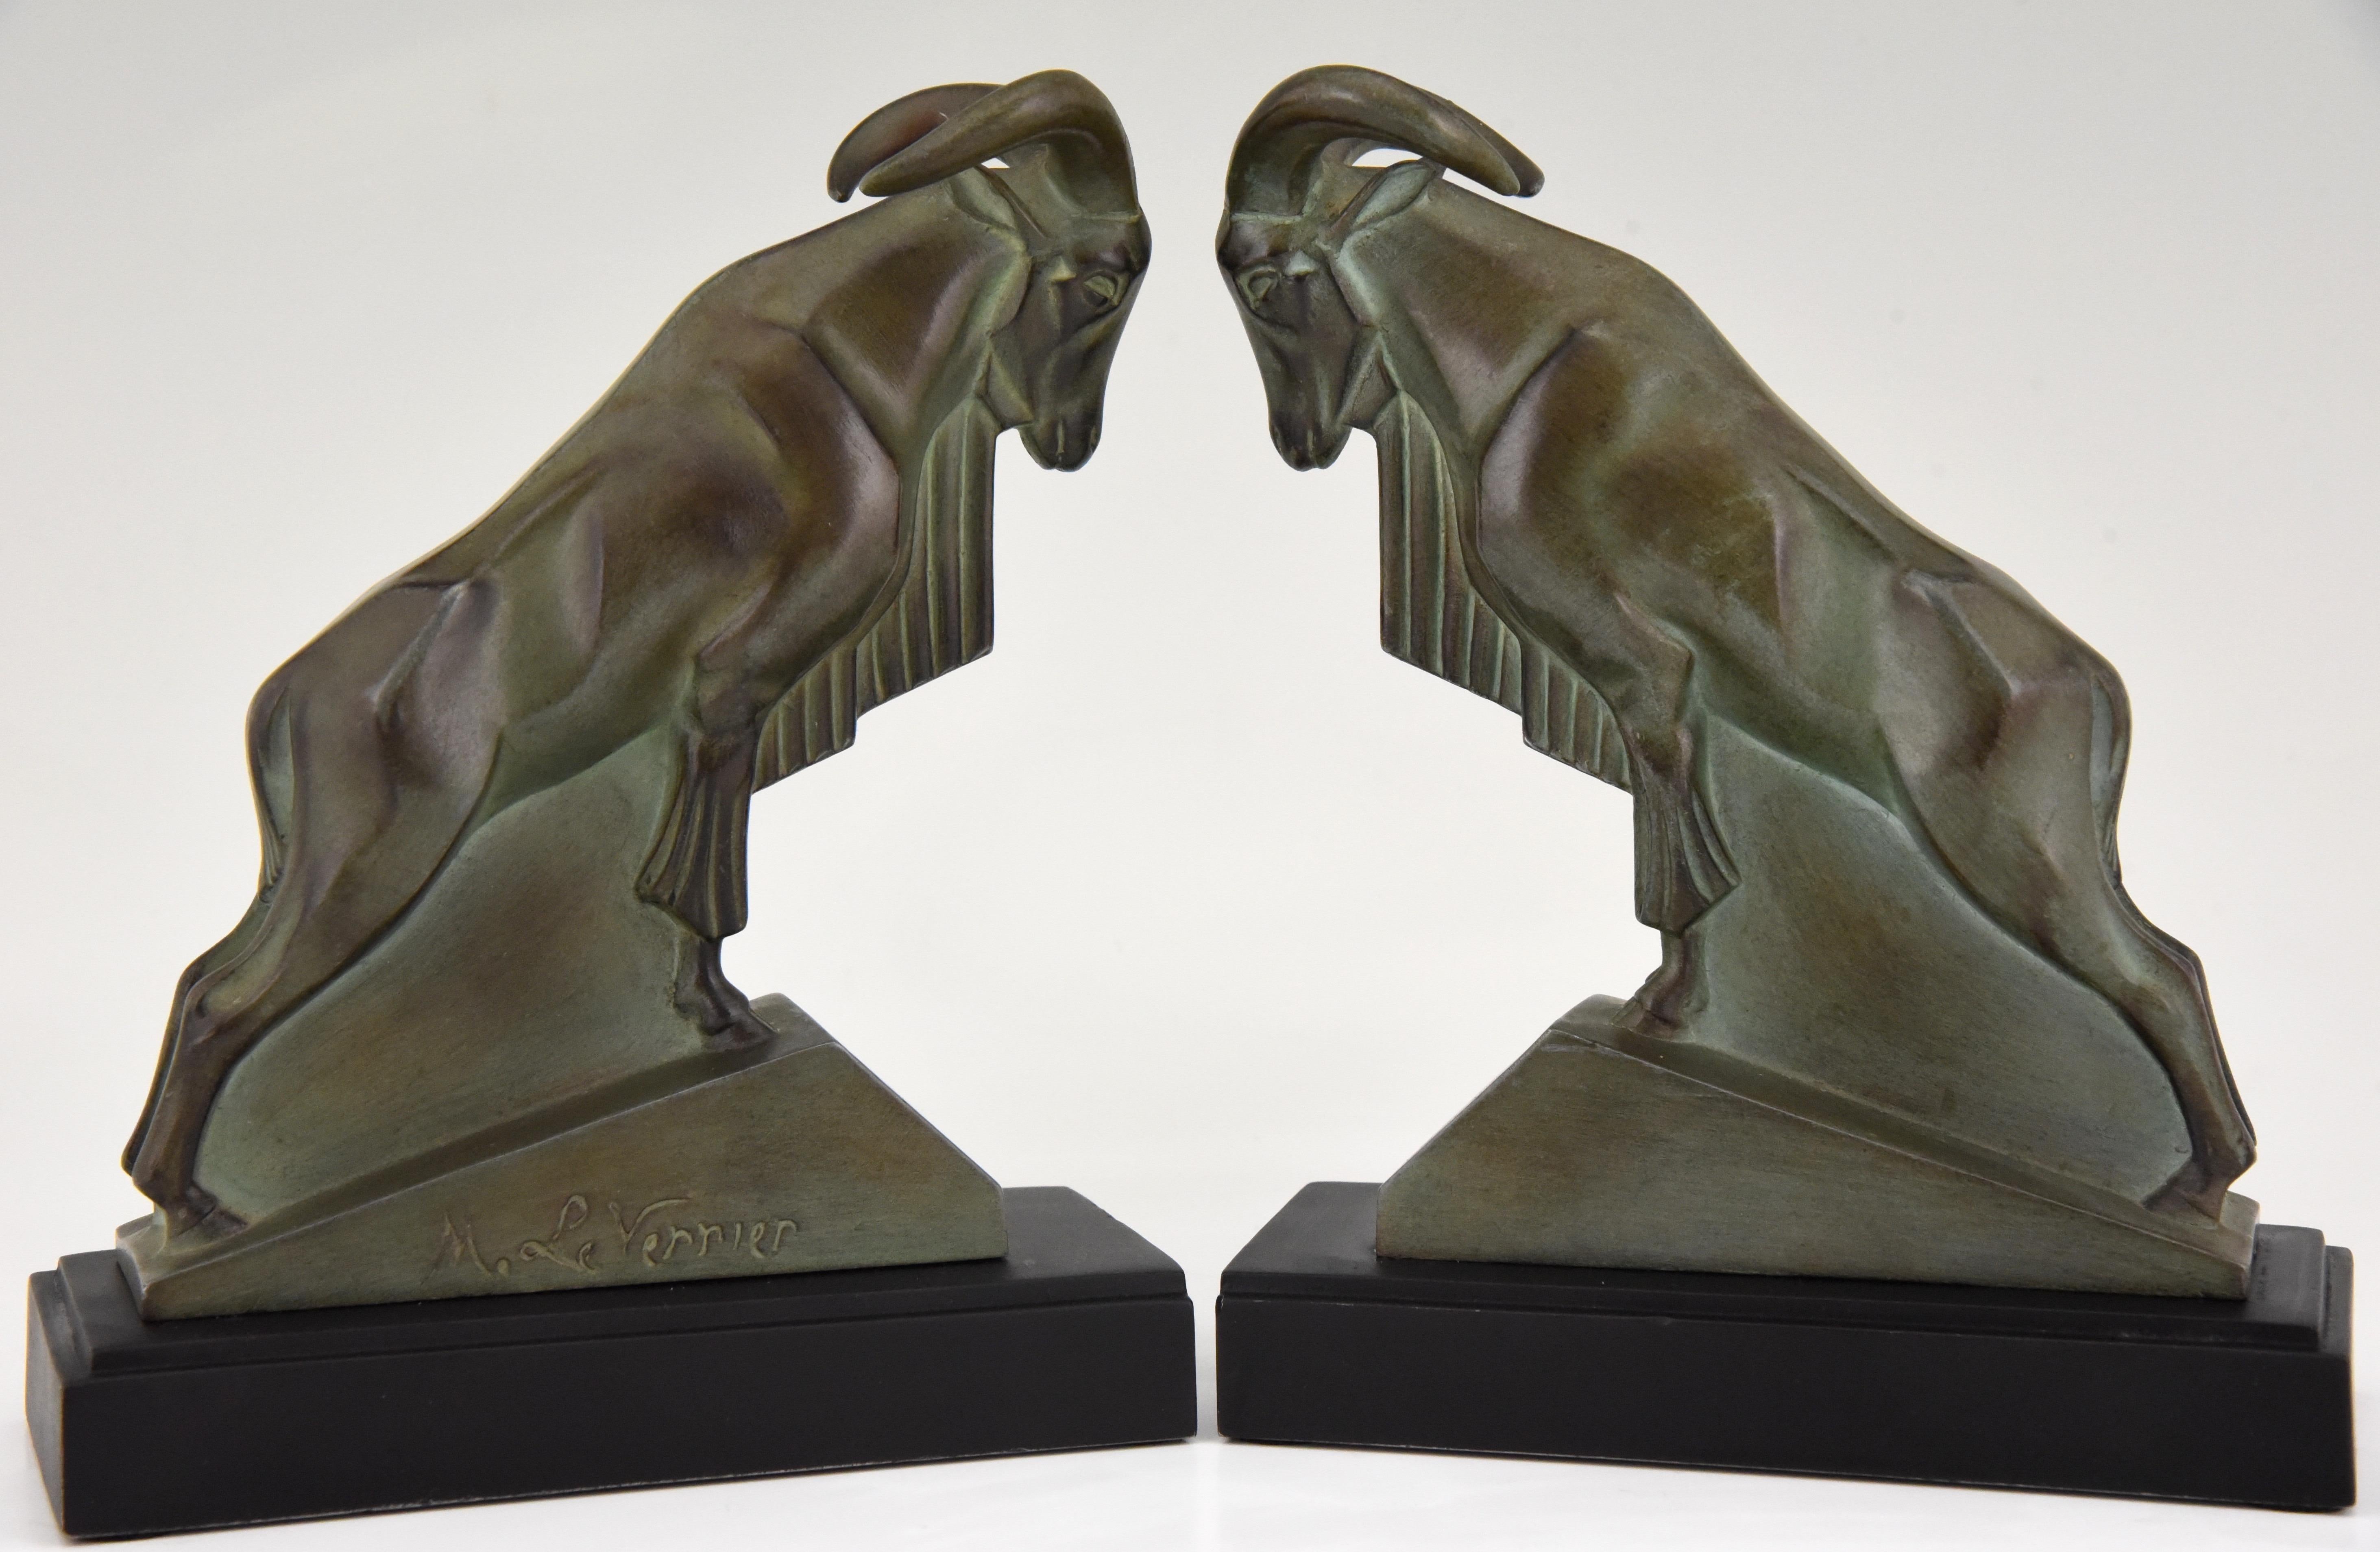 Stylish Art Deco Ibex or Ram bookends, signed by the well know sculptor Max Le Verrier with lovely green patina. The bookends are mounted on a Black metal base. France 1930.
Literature:
“Art Deco sculpture” by Victor Arwas, Academy. “Bronzes,